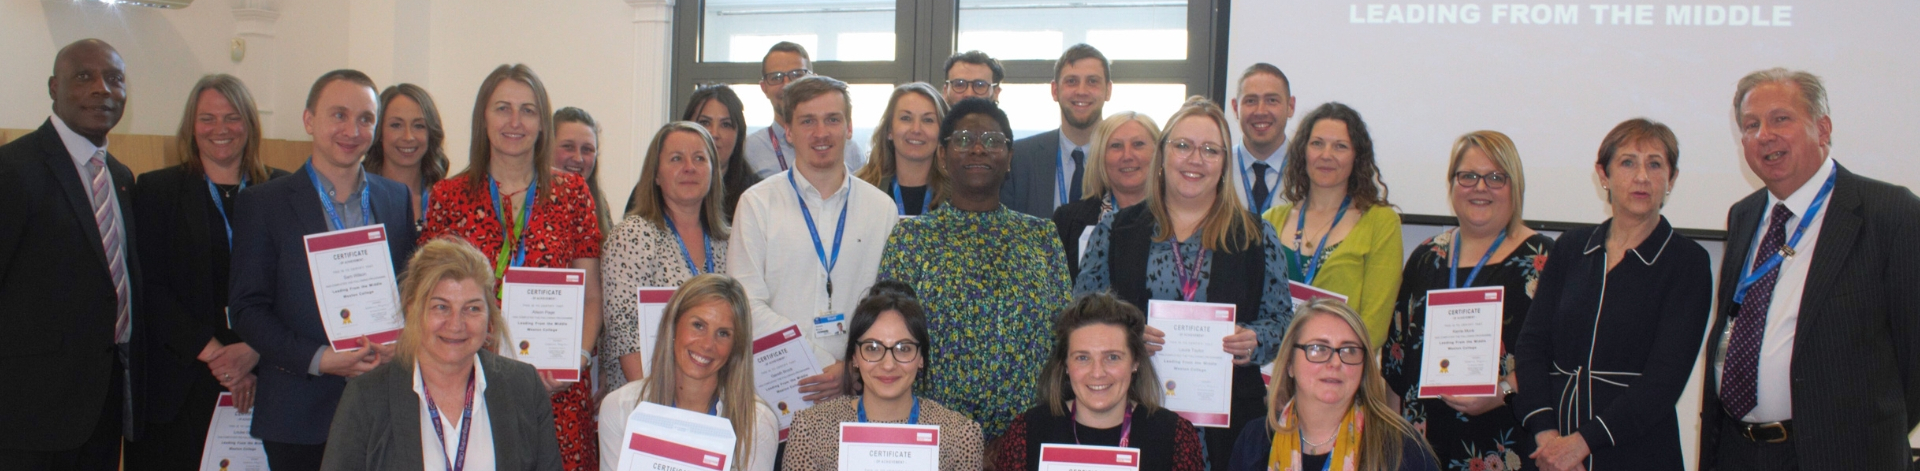 Staff with Certificates from Management Course